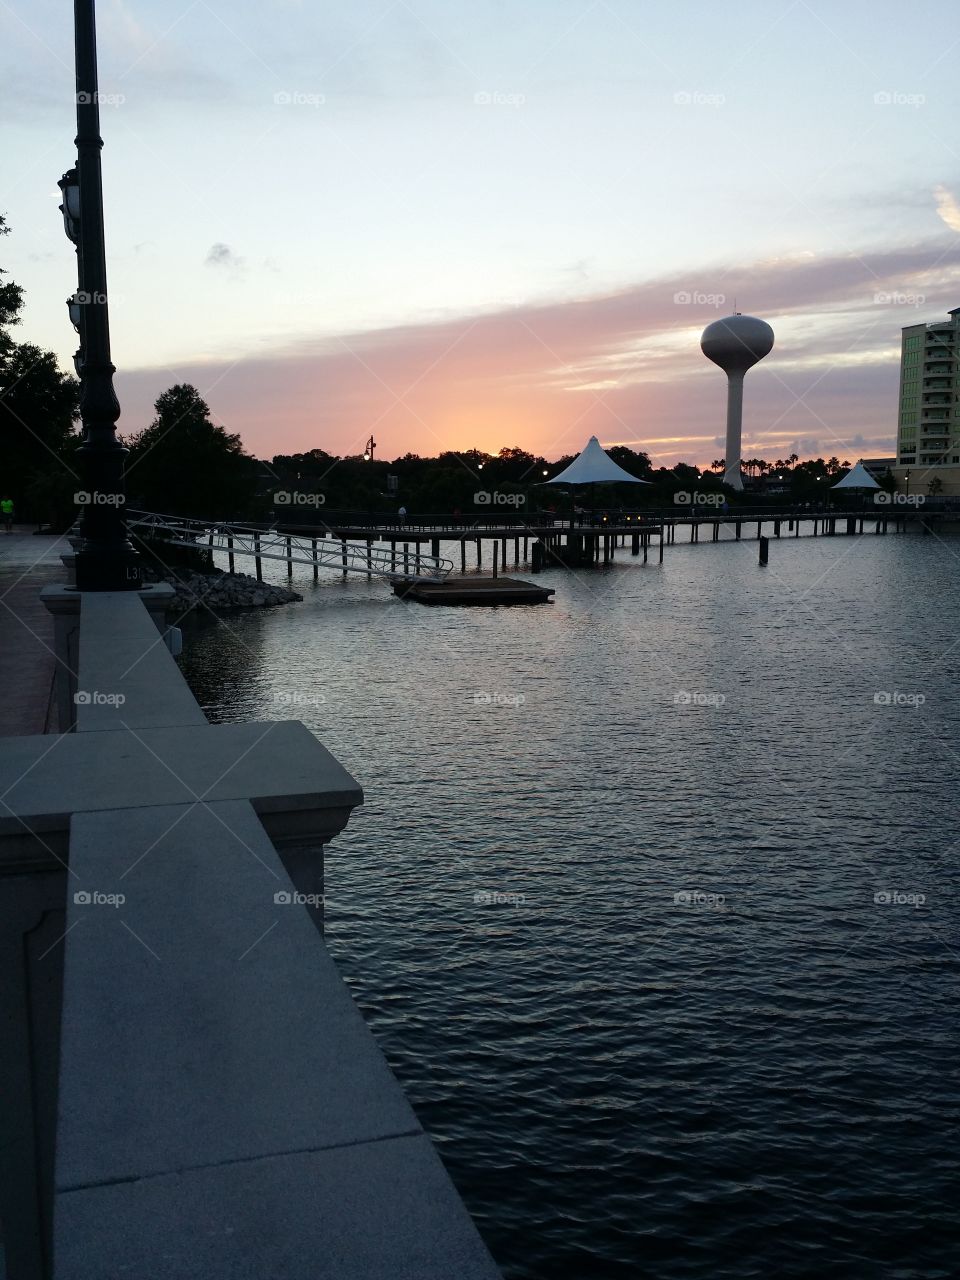 A Sunset In The Park. Took this at Cranes Roost in Altamonte Springs Florida